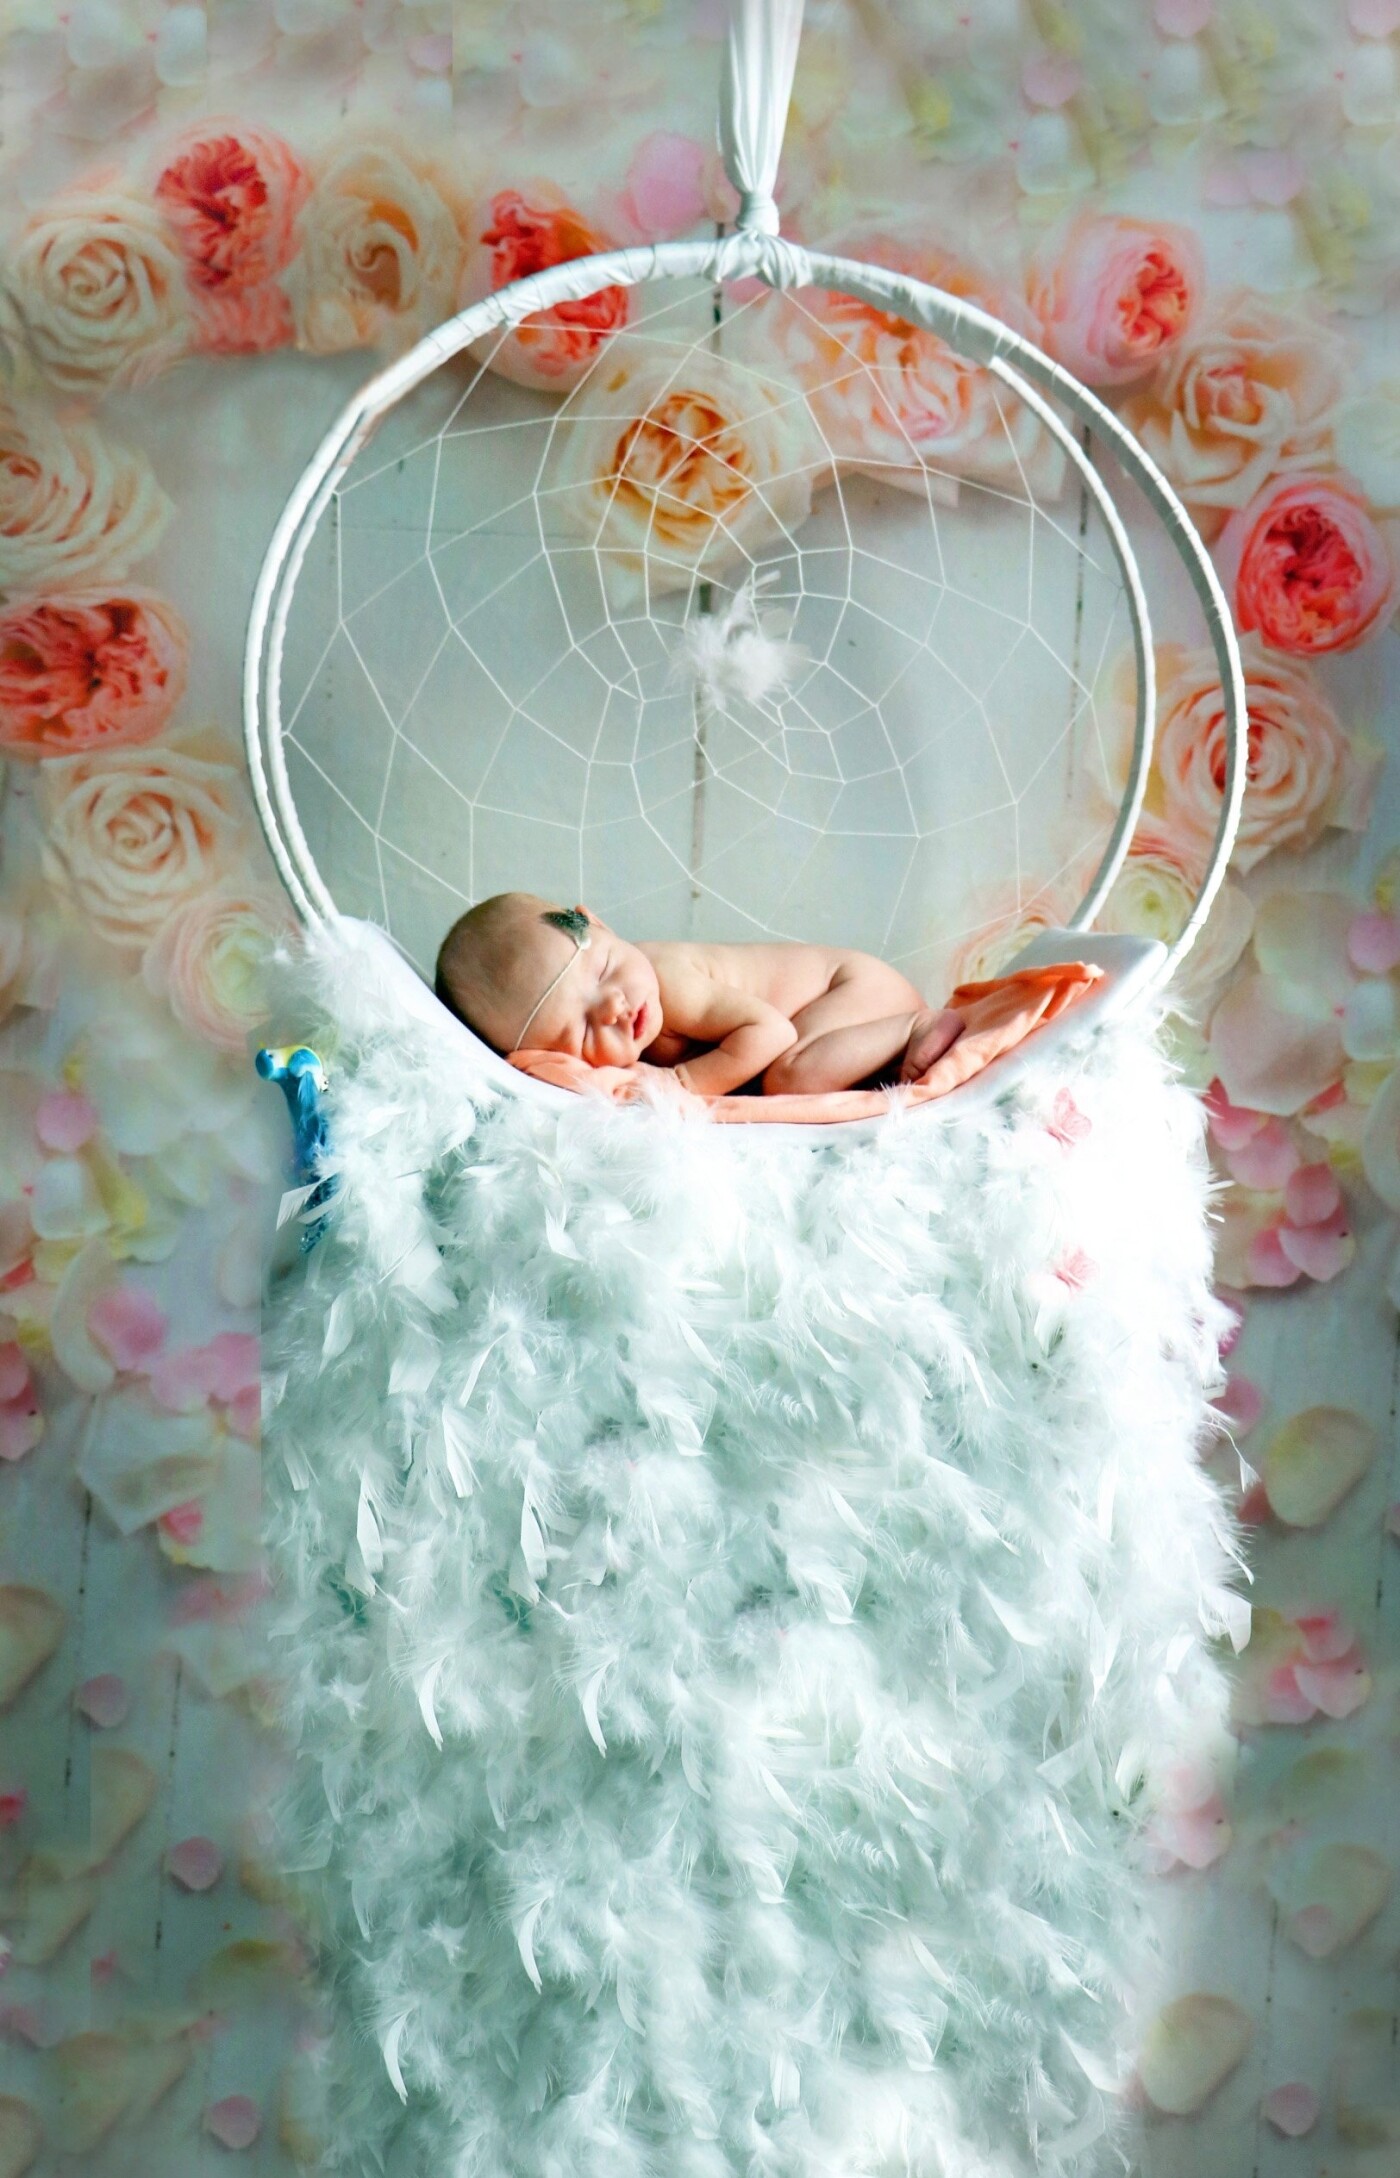 Baby Girls is the first girl in the long line of grandchildren for Misty Norris. And Mrs Norris has been coming to my studio for over a year now. So when she called and told me they had a baby girl coming to visit me, I was so excited. She was so tiny and was also my first baby to model my new dream catcher.. The entire picture came out amazing. 